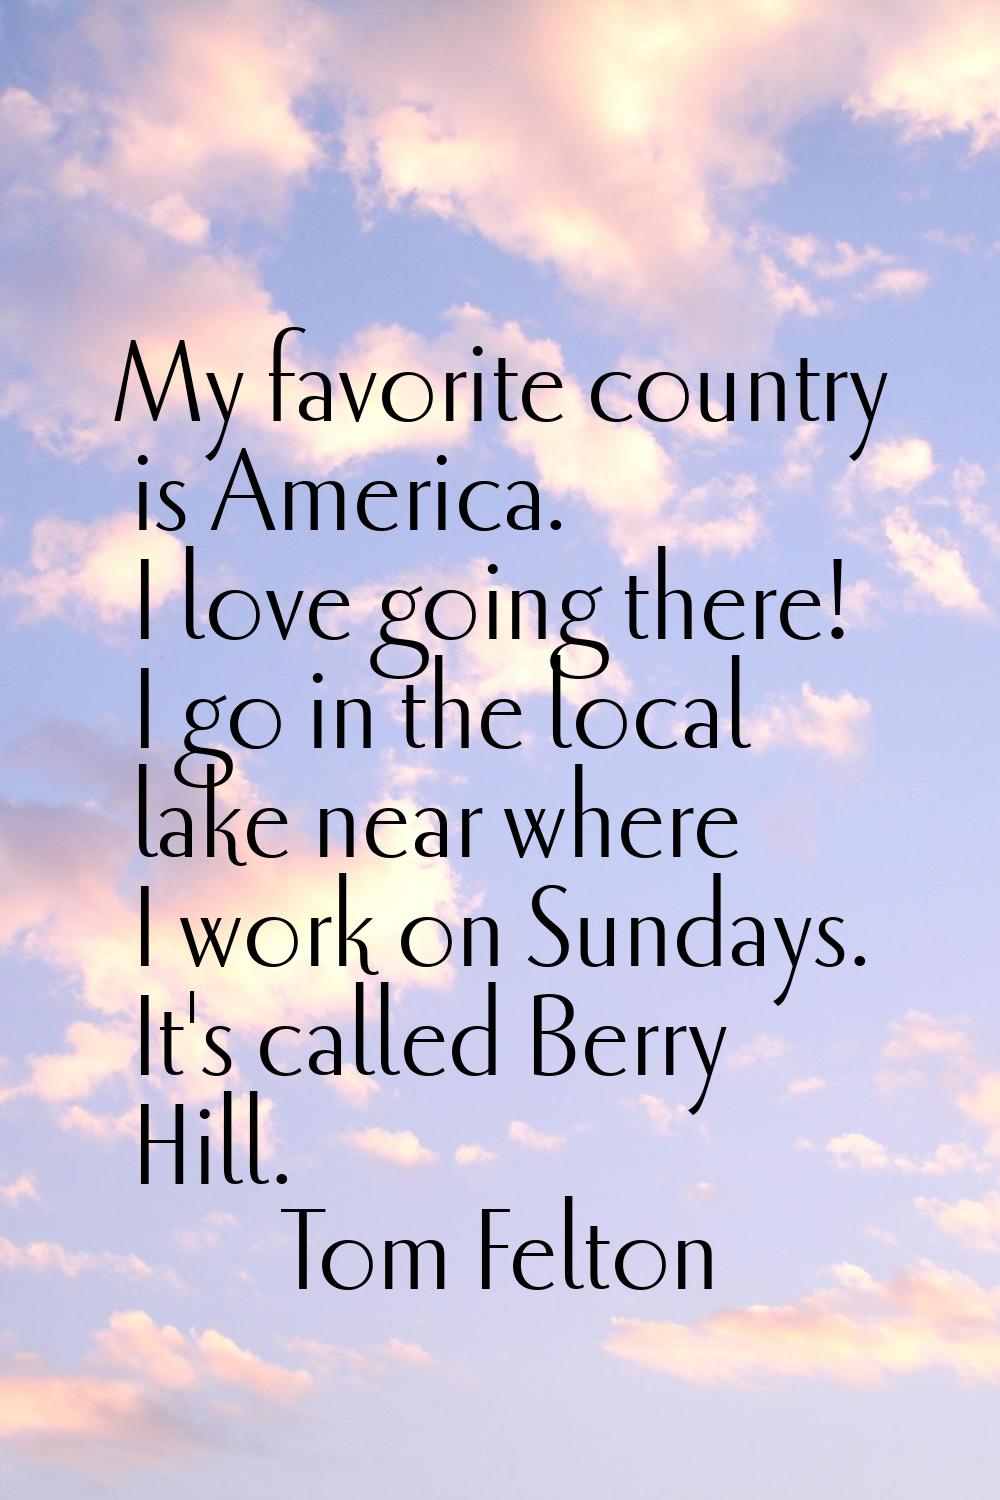 My favorite country is America. I love going there! I go in the local lake near where I work on Sun